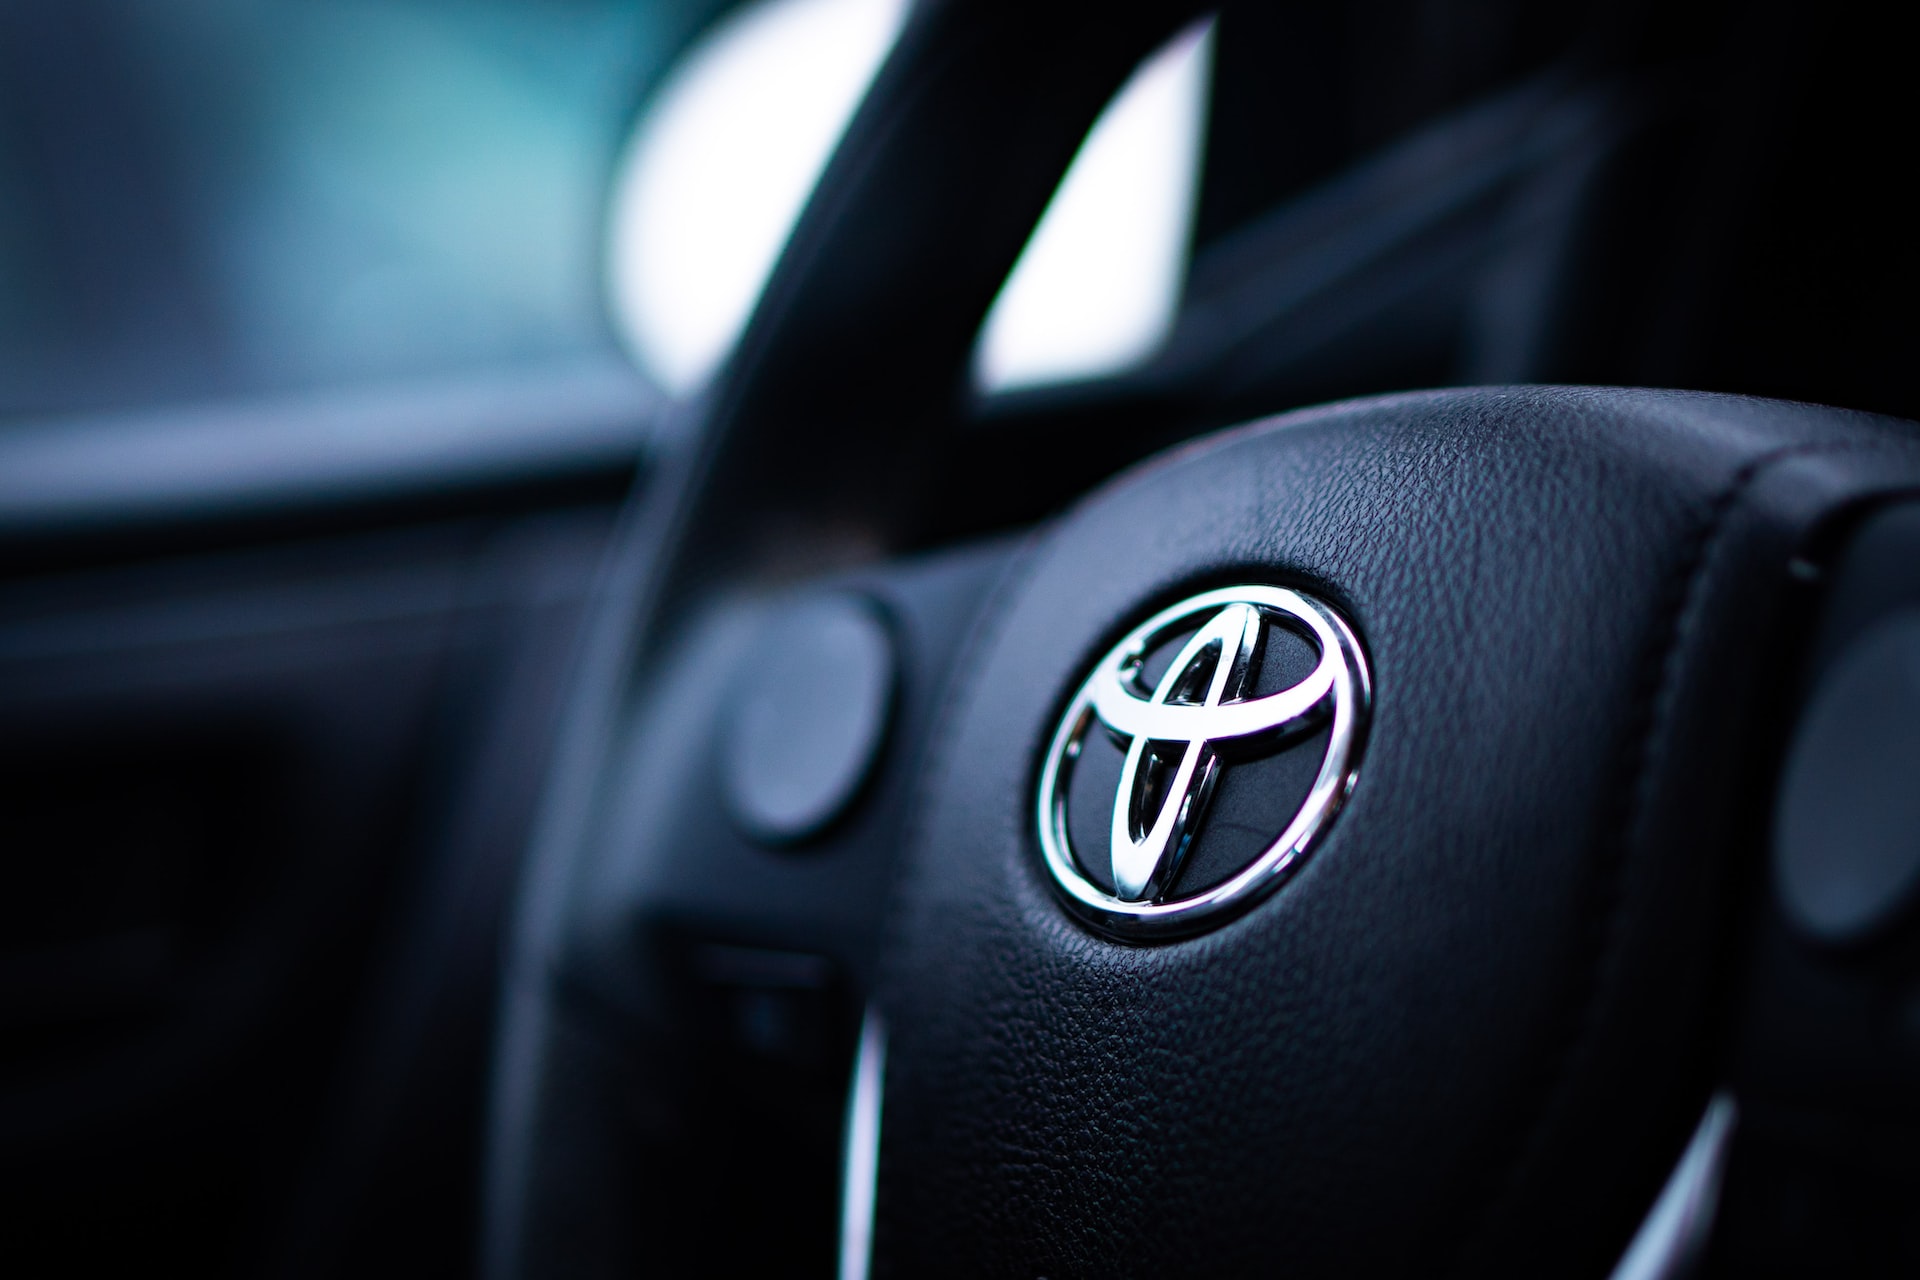 A close-up of a black Toyota steering wheel inside a vehicle